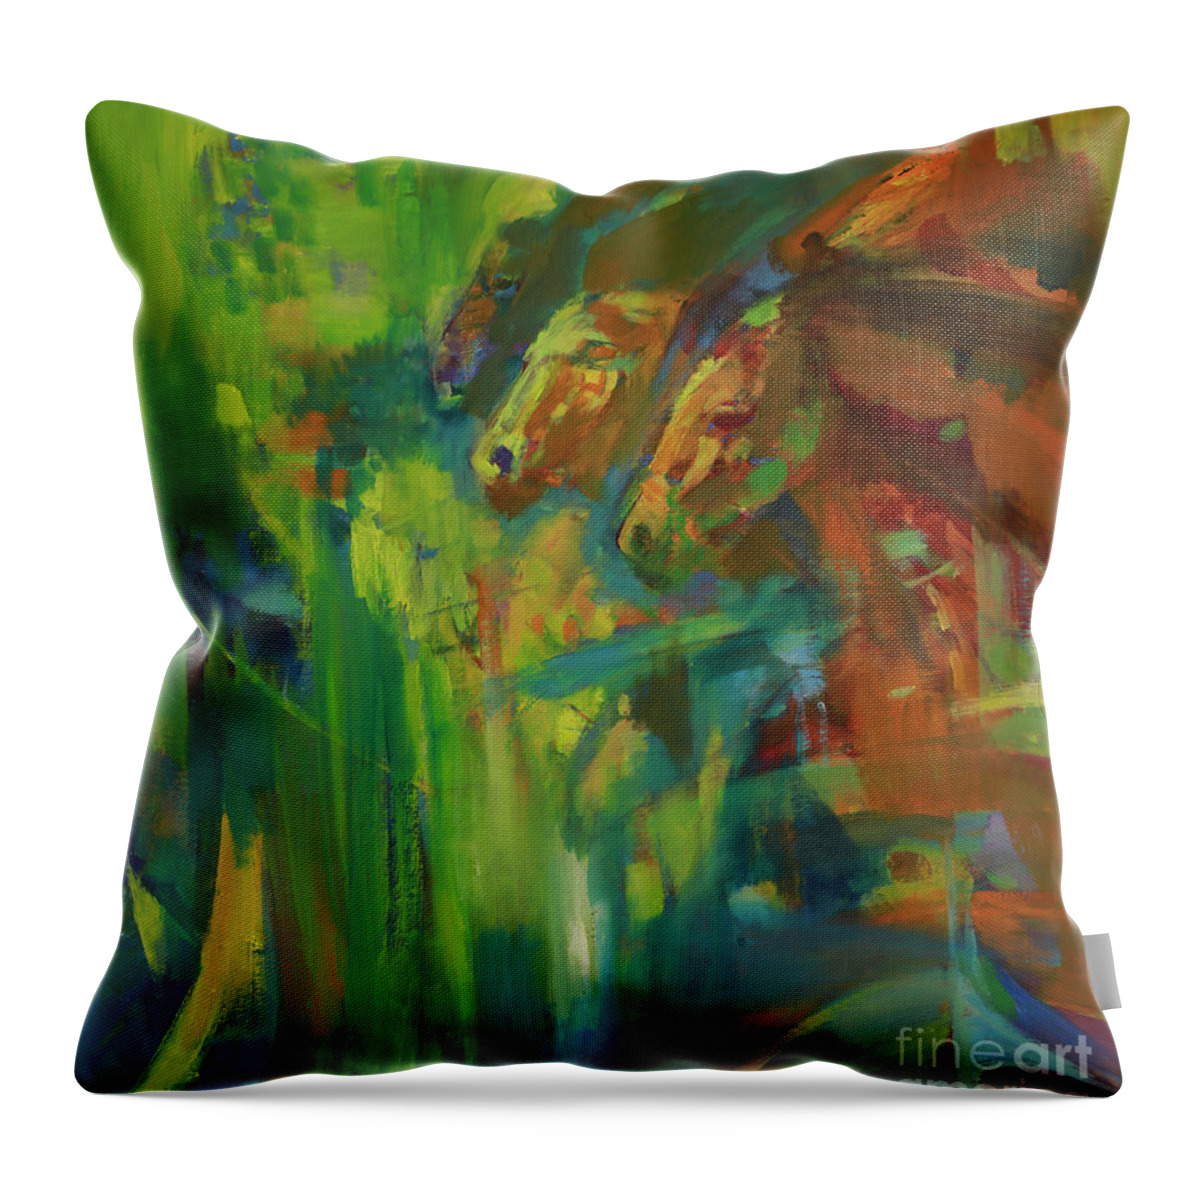 Mongolian Throw Pillow featuring the painting Zohiomj by Tumurbaatar Shuuvanz